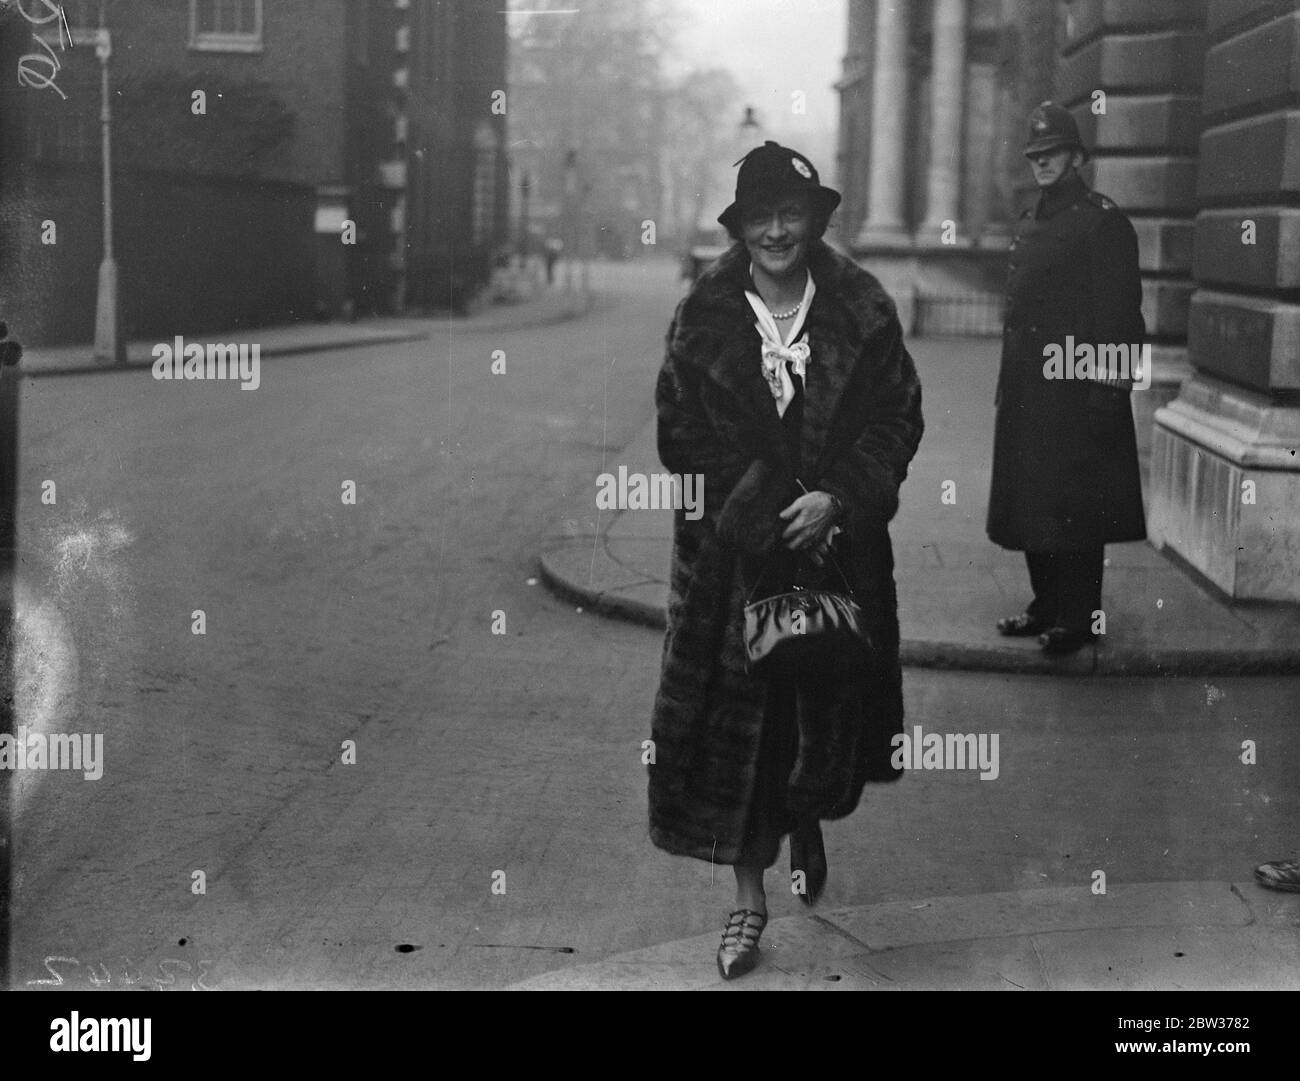 Lady Astor as member of native races deputation to Colonial Secretary . Lady Astor was a member of a Deputation of Native Races received by Sir Philip Cunliffe - Lister , the Colonial Secretary at the Colonial Office . Photo shows ; Lady Astor smiling as she left the Colonial Office . 18 December 1933 Stock Photo